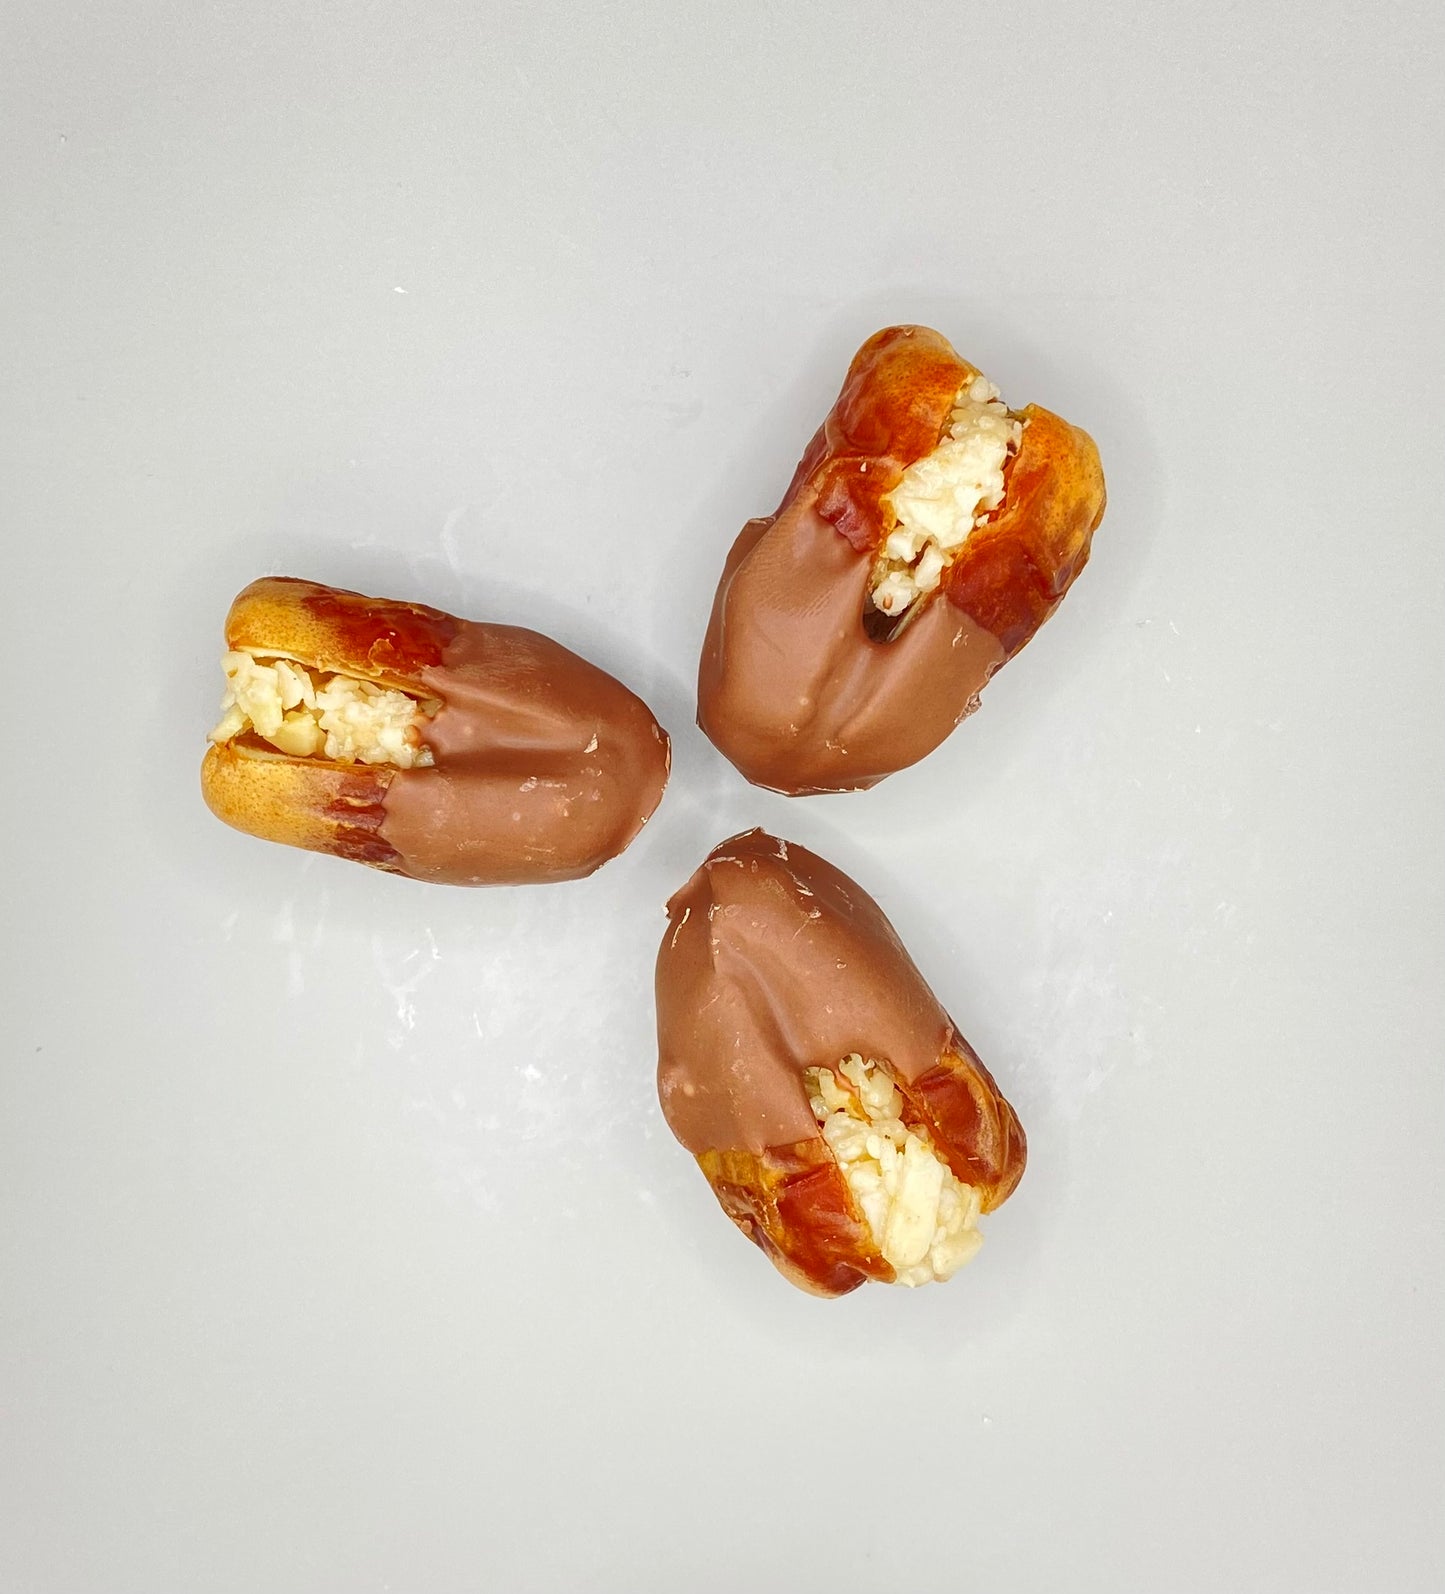 Milk Chocolate Dates Stuffed With Nuts